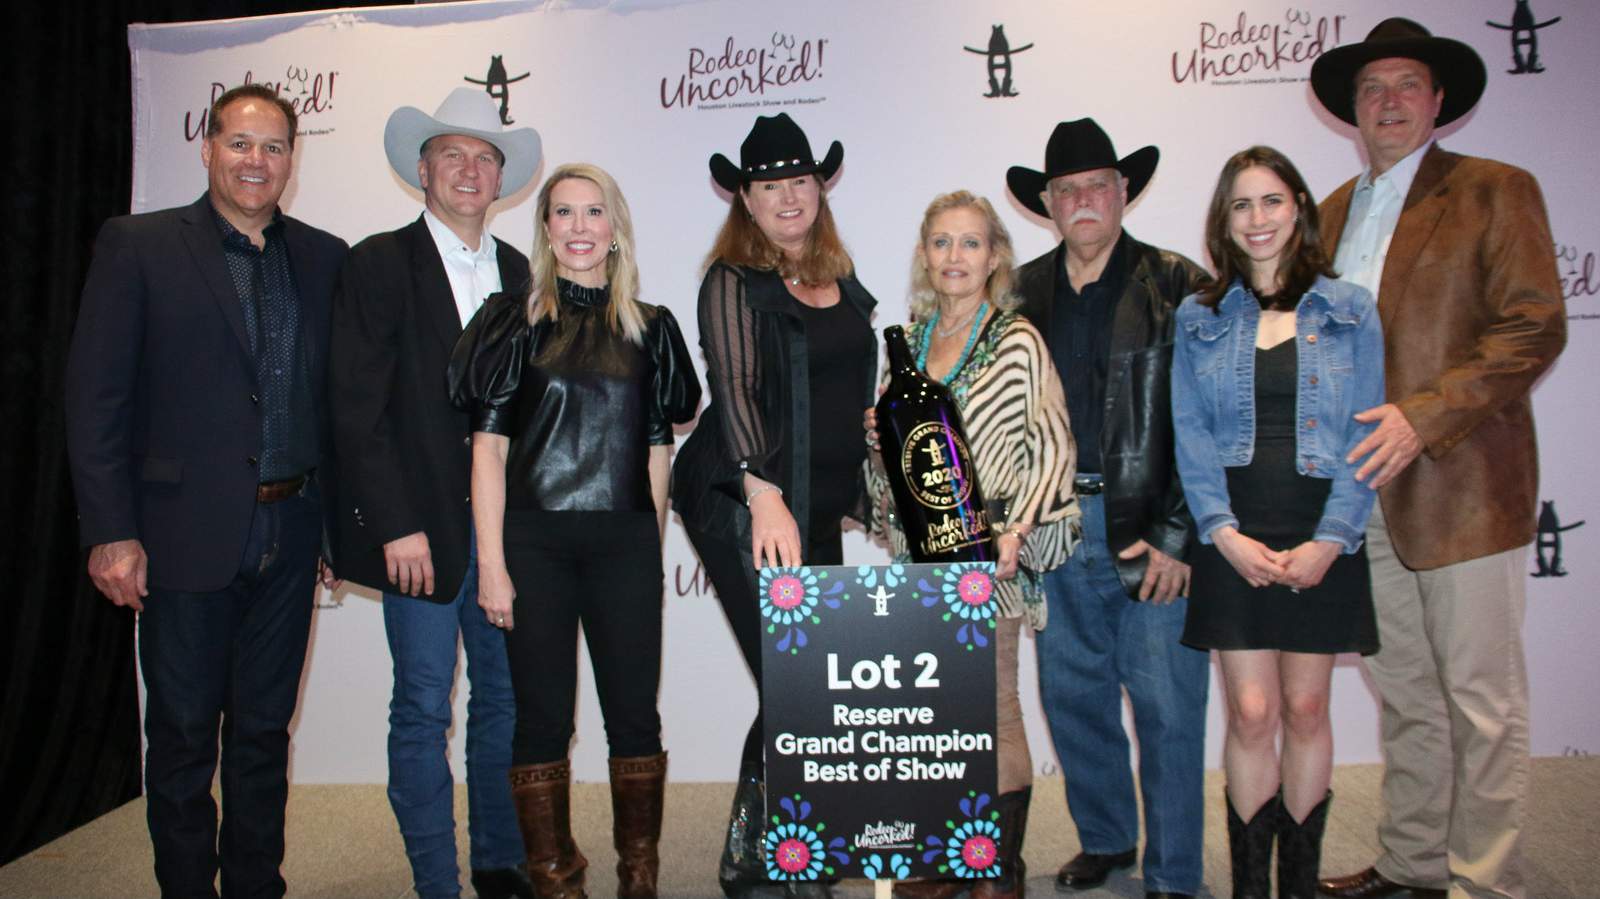 Wine sold for $220,000 at this year’s Rodeo Uncorked Champion Wine Auction